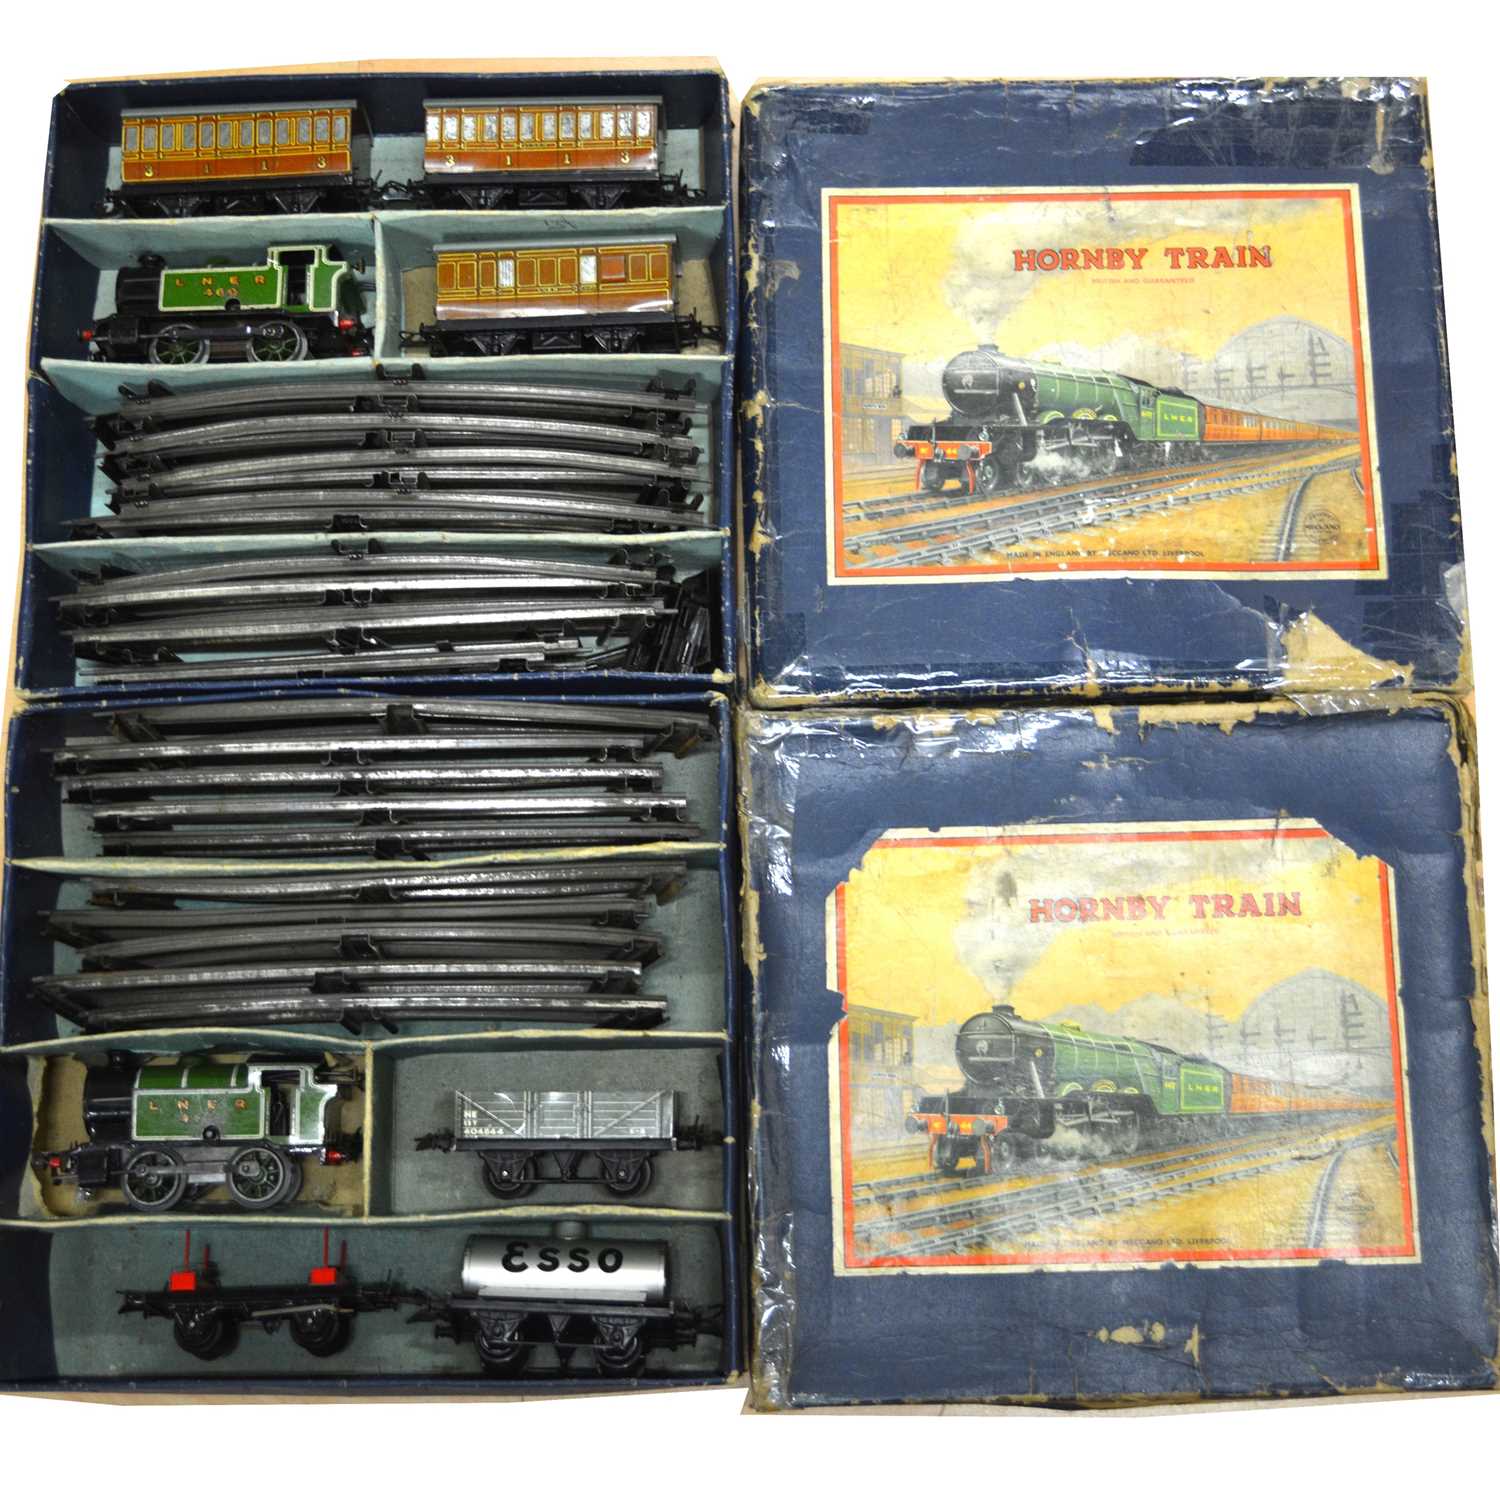 Lot 102 - Two Hornby O gauge model railway train sets, including no.101 and no.202